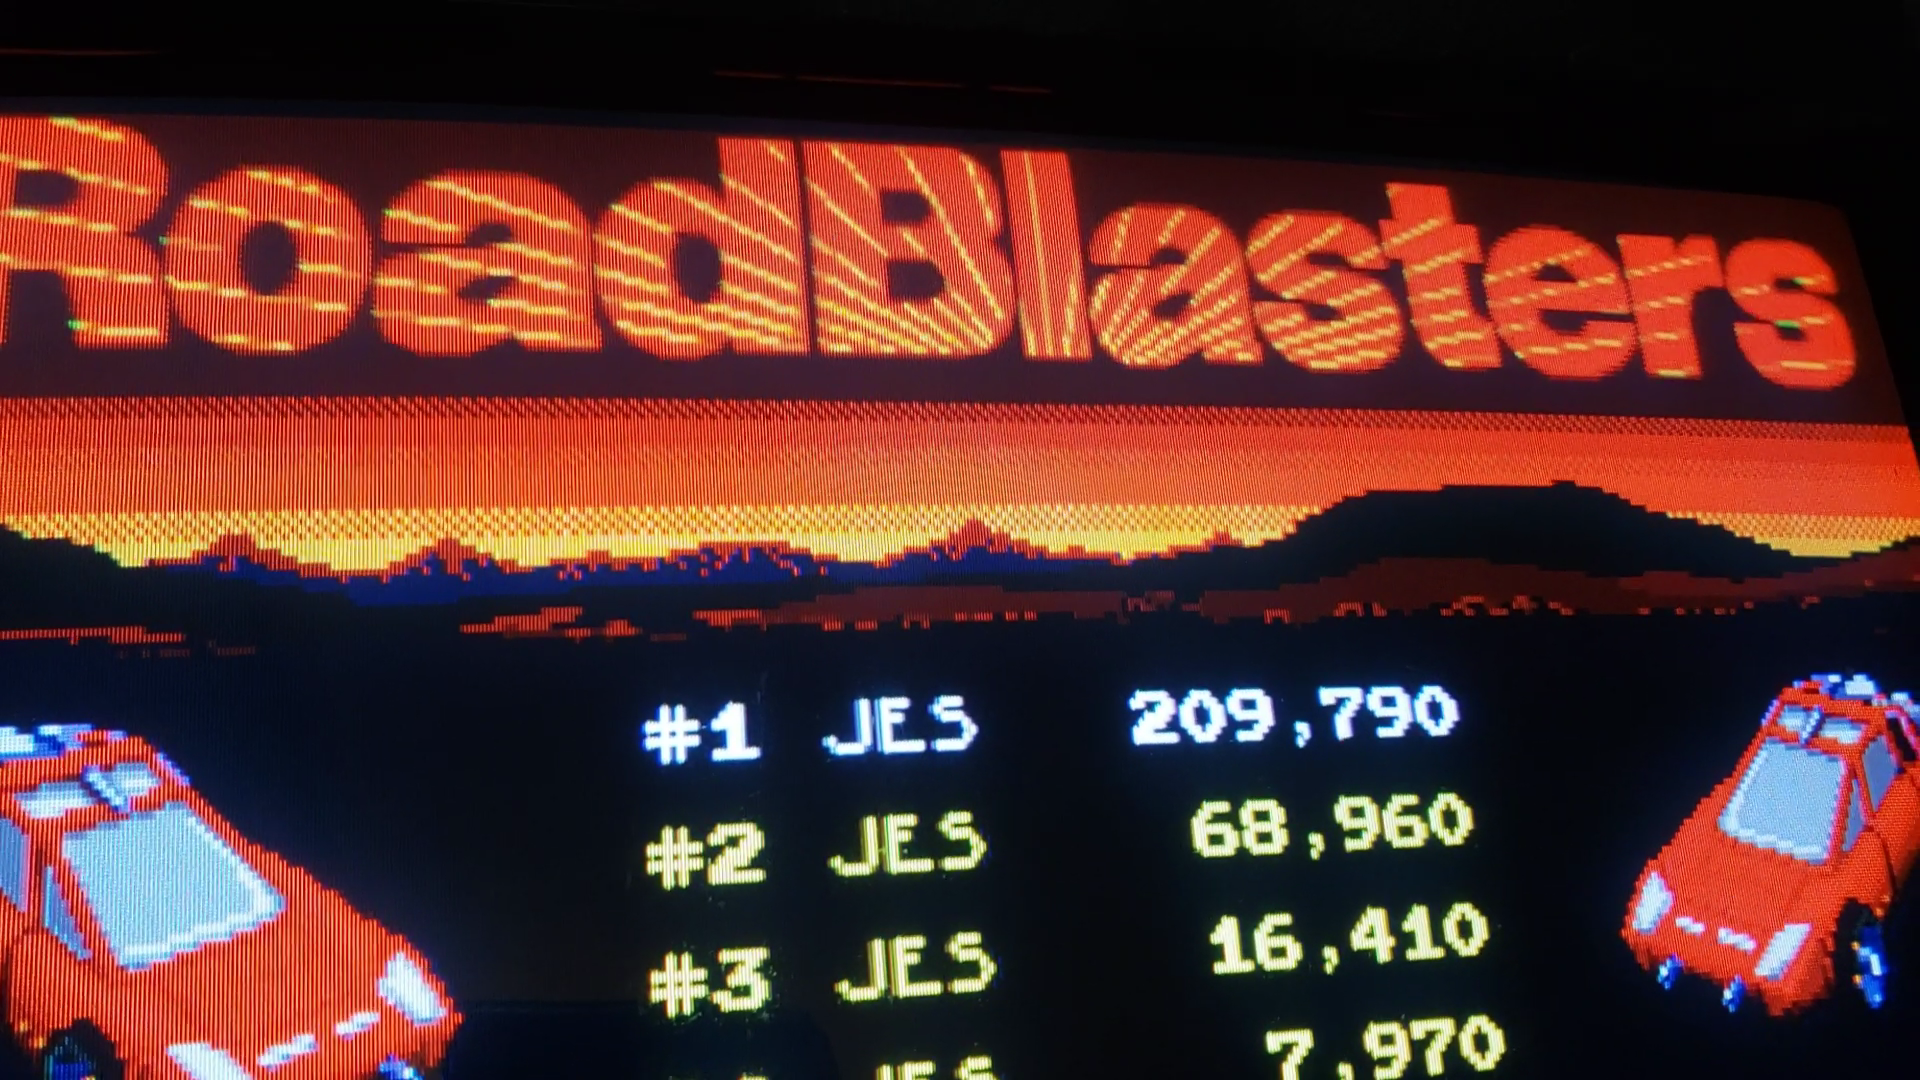 JES: RoadBlasters [Level 11 Start] (Arcade Emulated / M.A.M.E.) 209,790 points on 2021-03-02 03:37:44